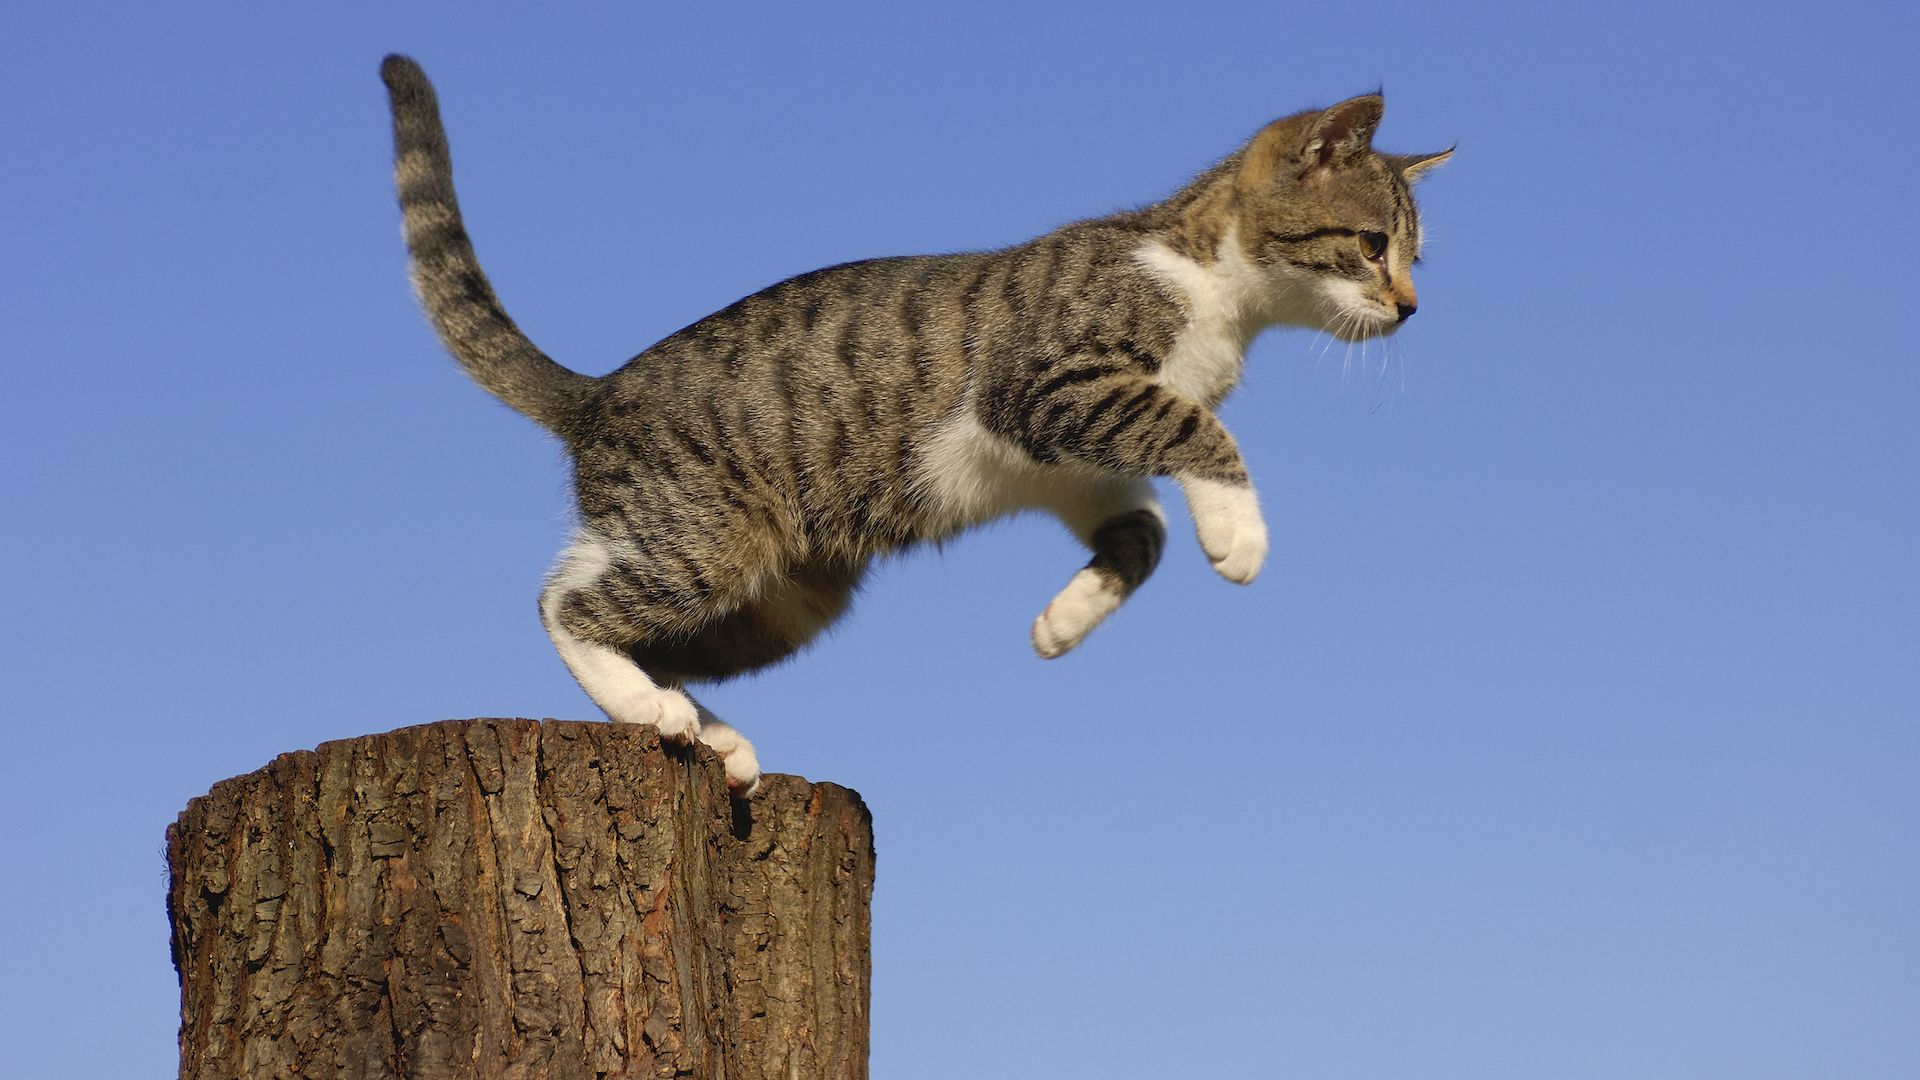 <p>                     Enjoy the sight of a cat walking along a railing, running up a tree, weaving in and out of traffic, jumping off walls, pouncing on unsuspecting victims, this is an animal that knows how to get its thrills and is pretty confident of its abilities. The stuntman of the animal kingdom.                   </p>